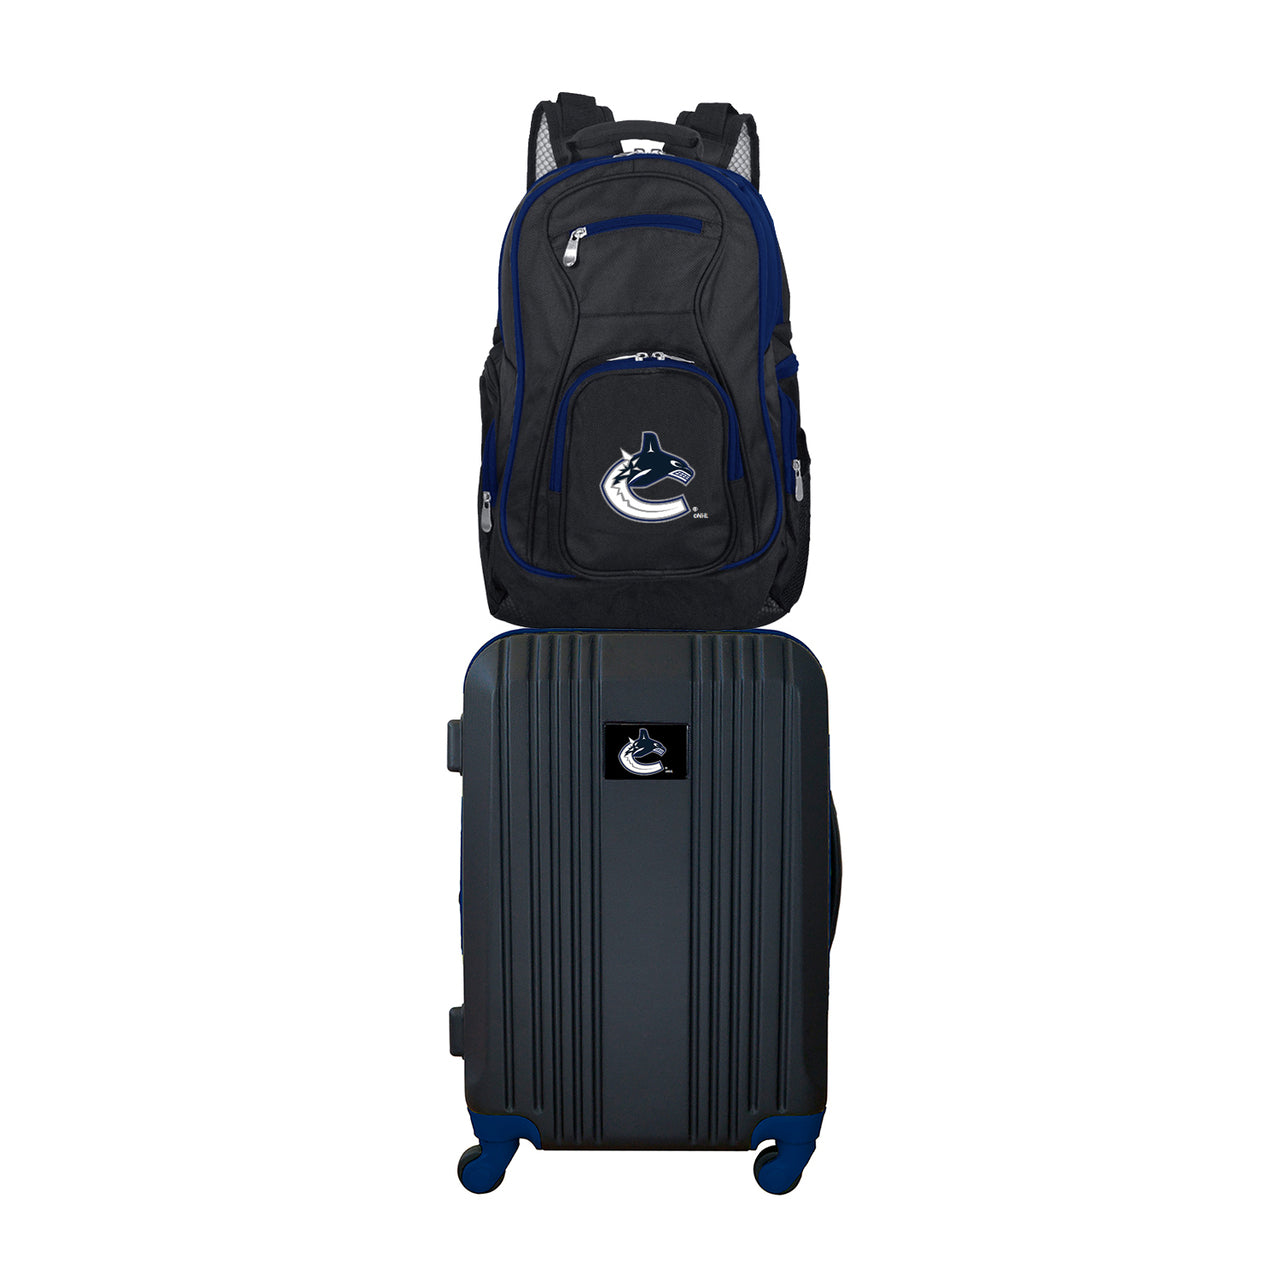 Vancouver Canucks 2 Piece Premium Colored Trim Backpack and Luggage Set